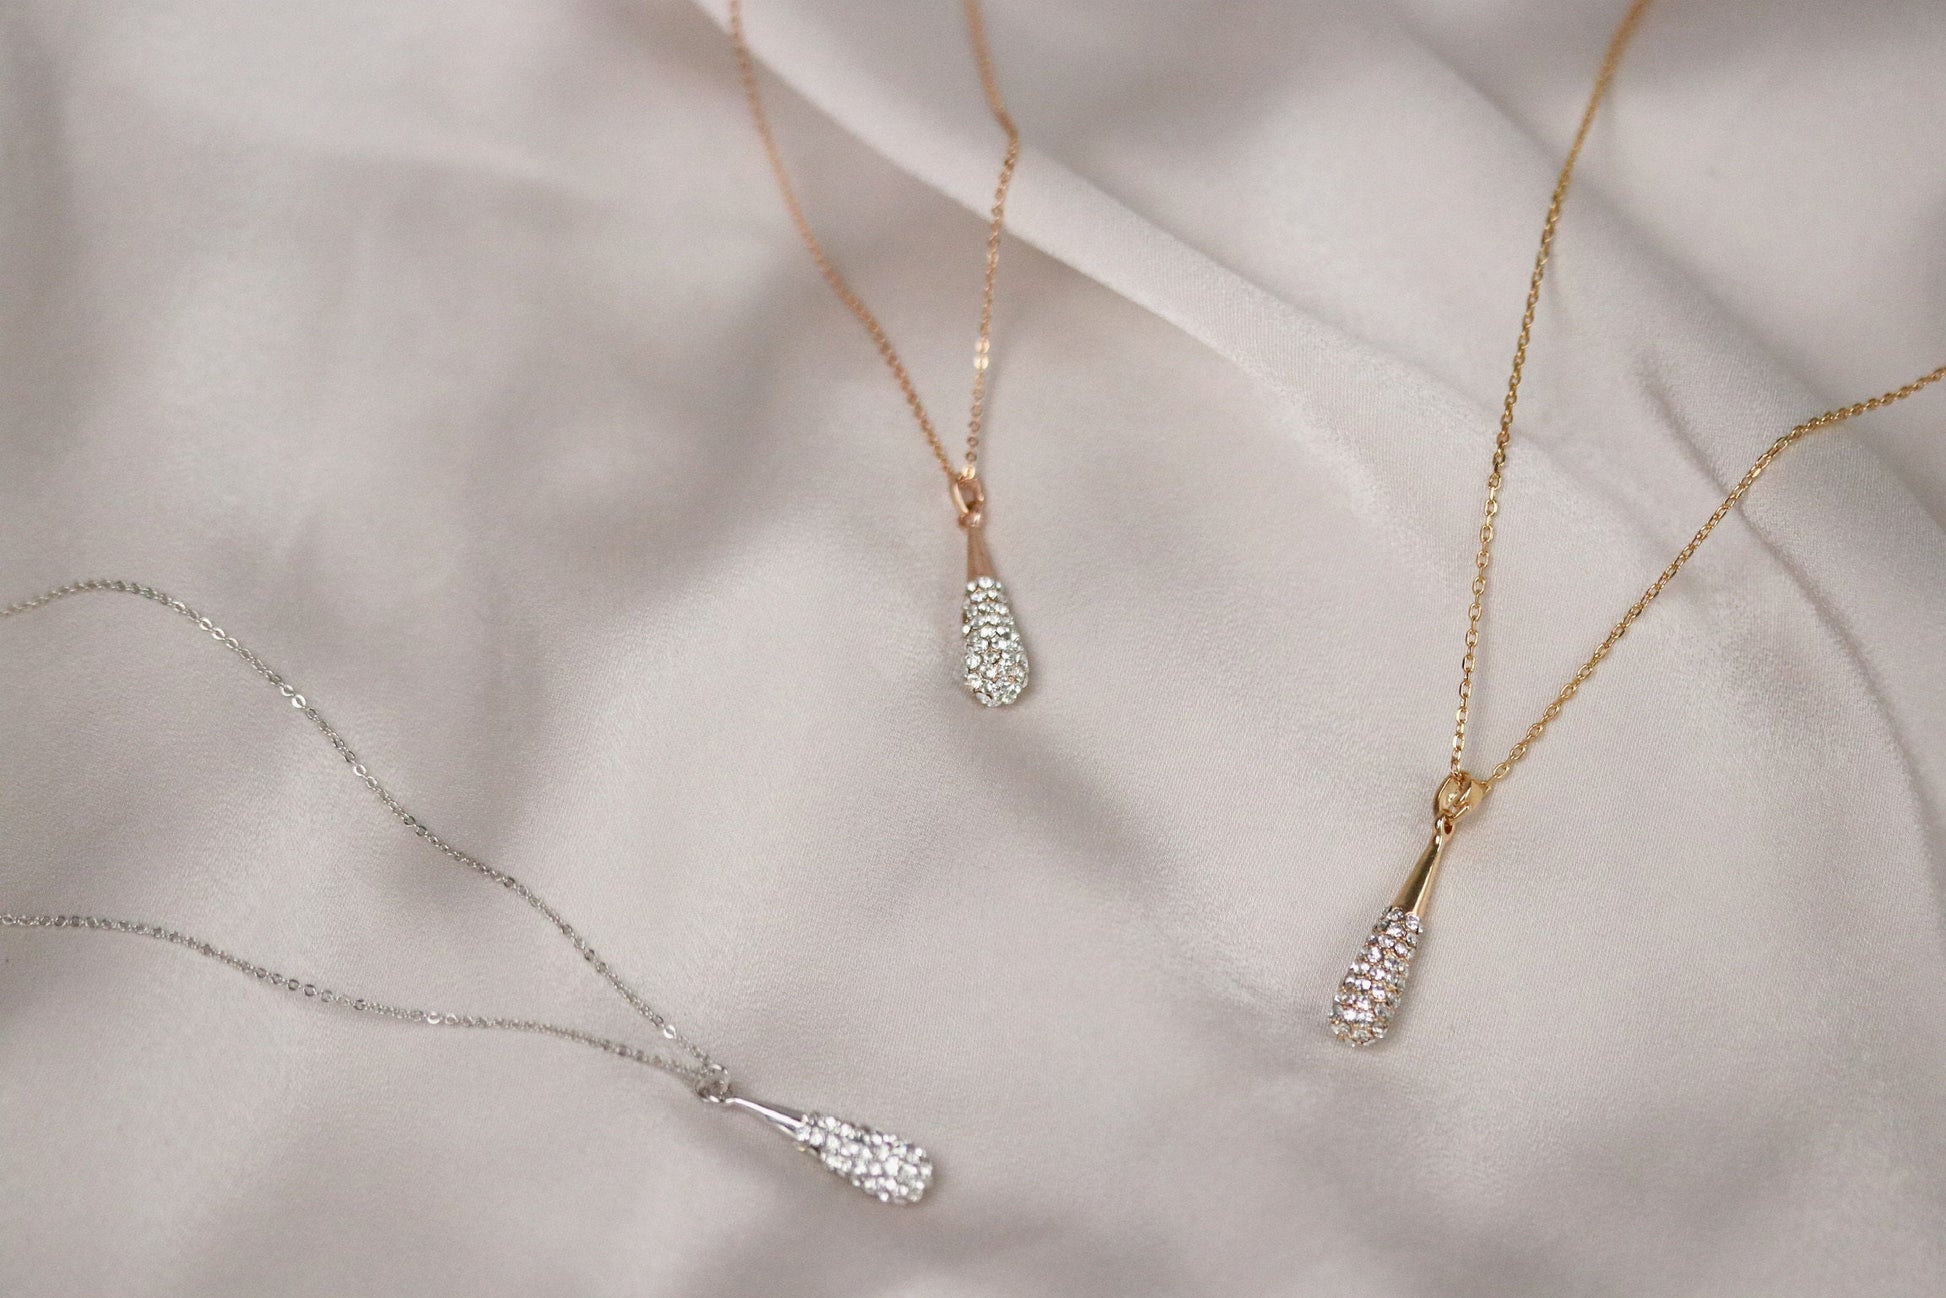 Silver Auntie Necklace • Long Teardrop Necklace • Floating Necklace • Pear Diamond Necklace • Gold Minimalist Jewellery • Aunt Gift for Her